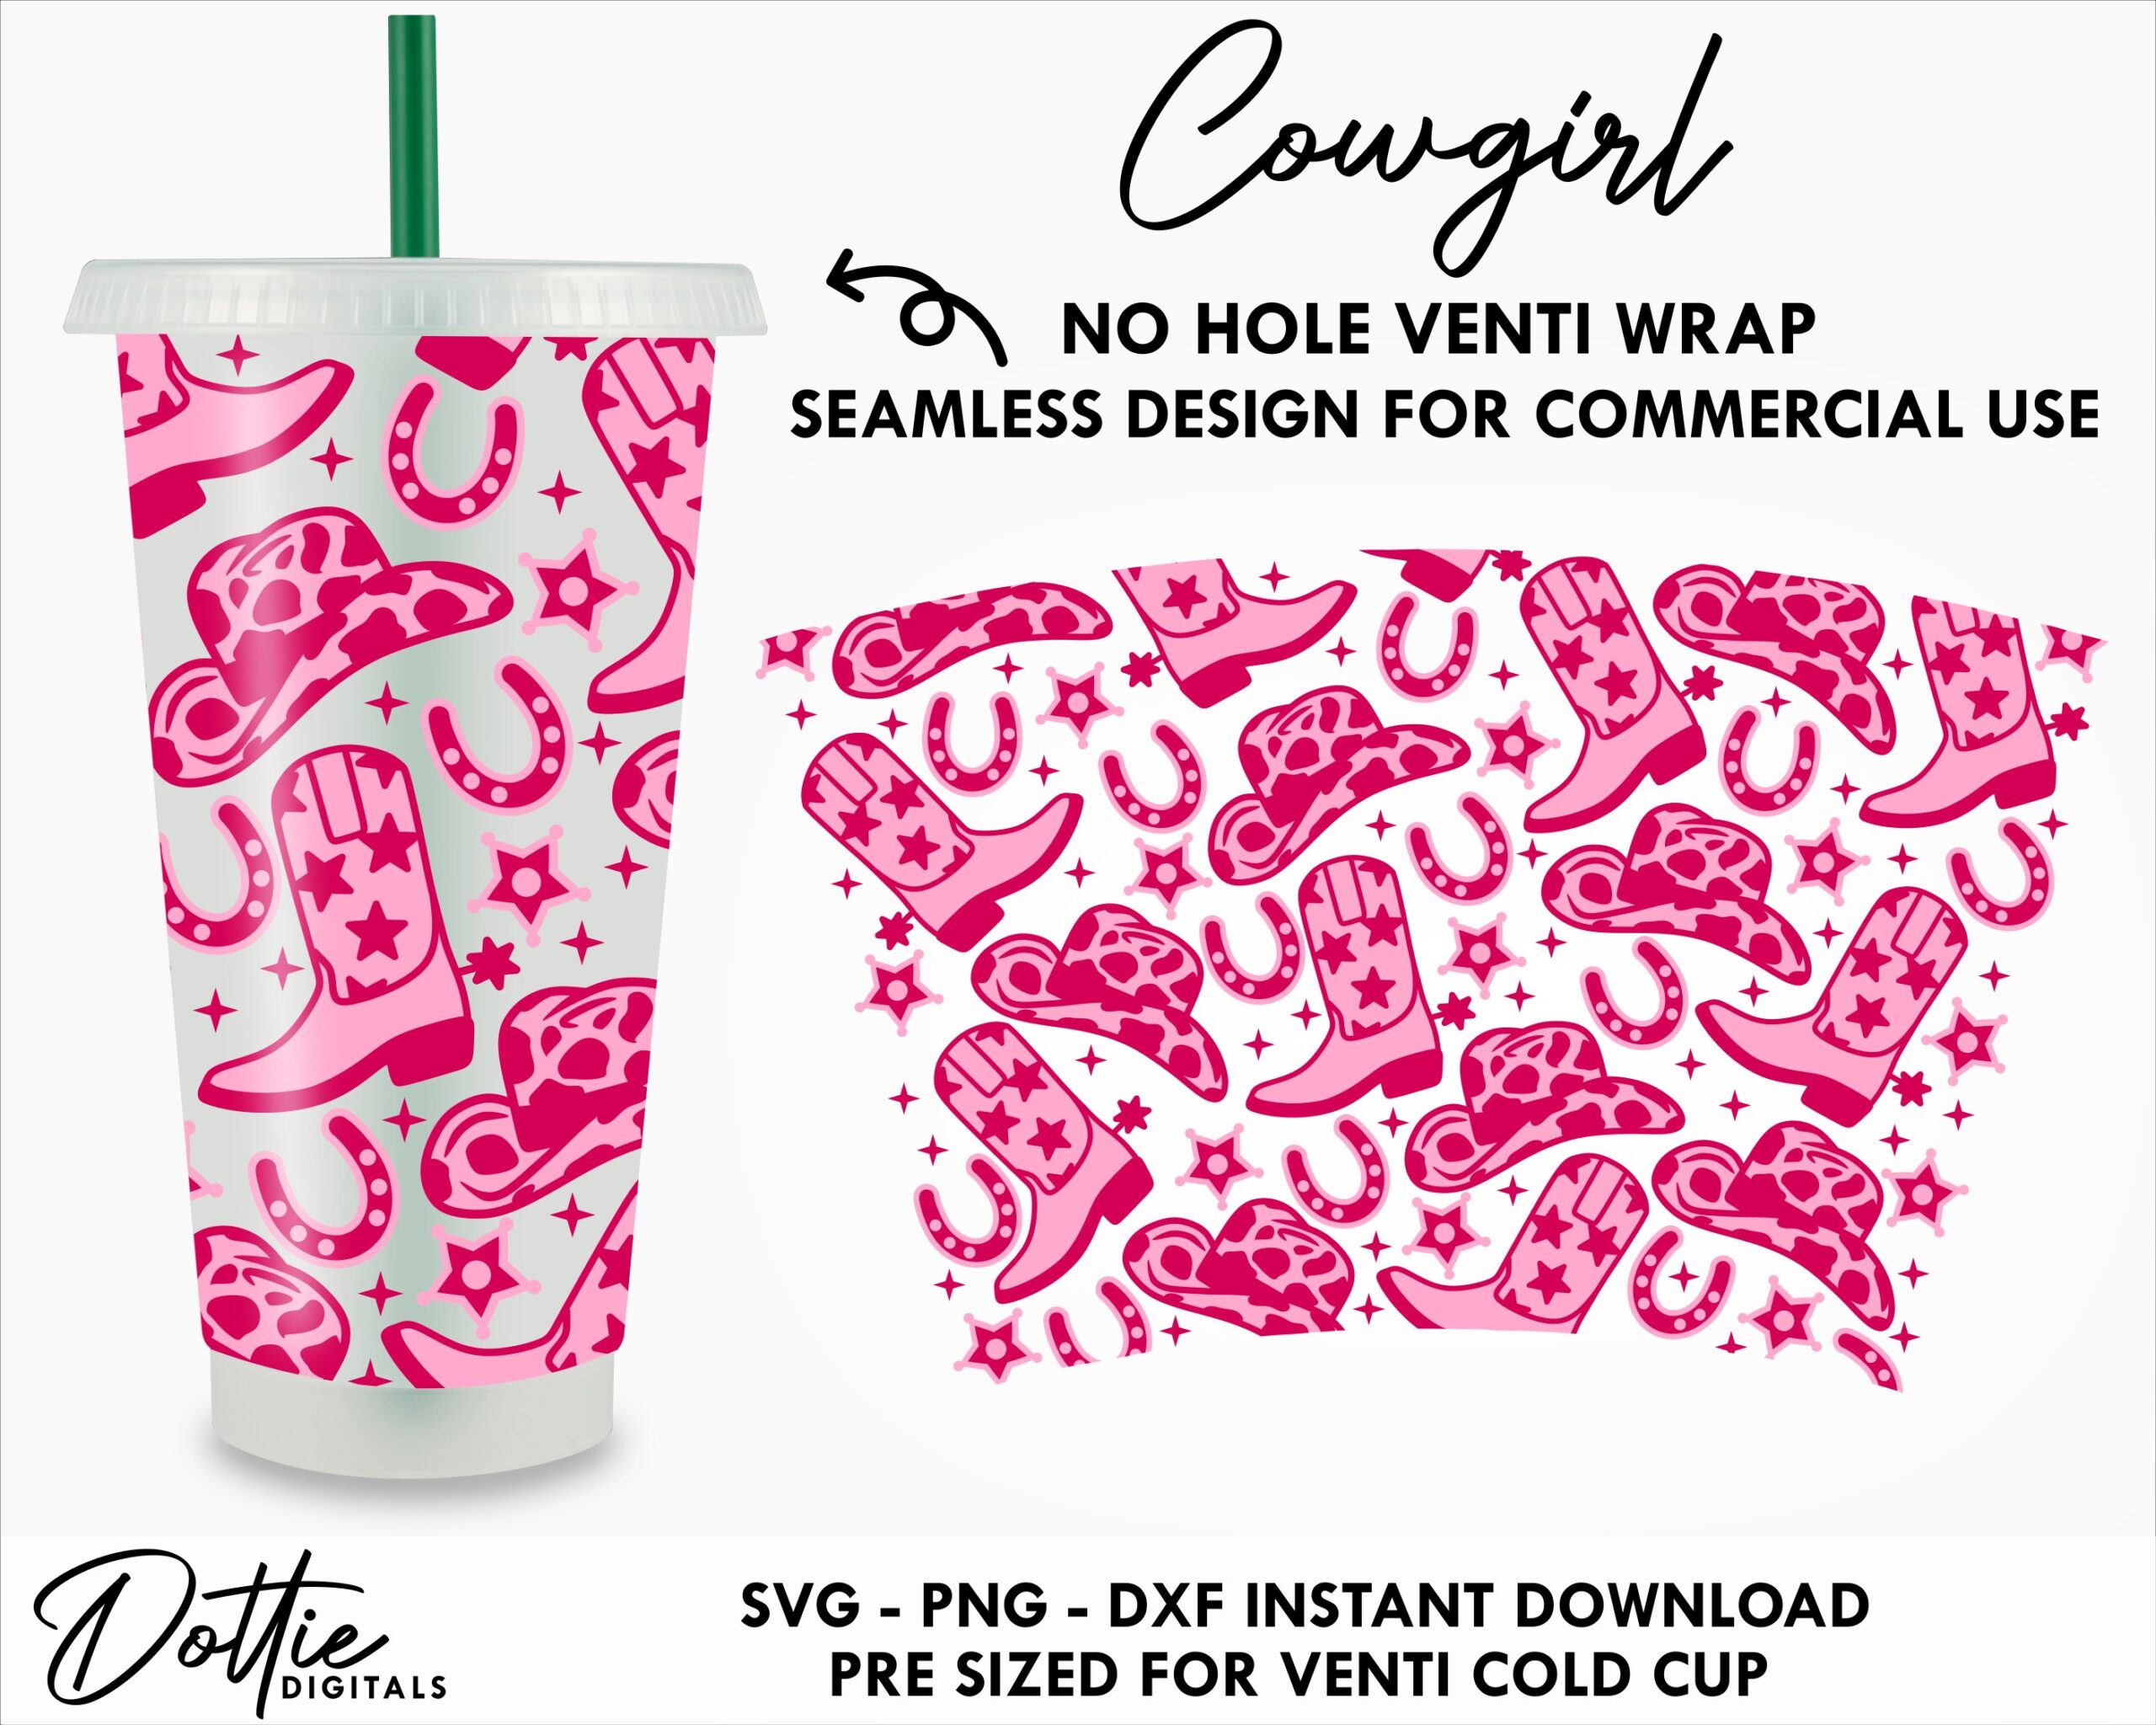 Starbucks full wrap template for Venti 24 oz cold cup SVG | Starbucks  Template SVG-EPS | Pre-Sized full wrap Template for Starbuck cold cup